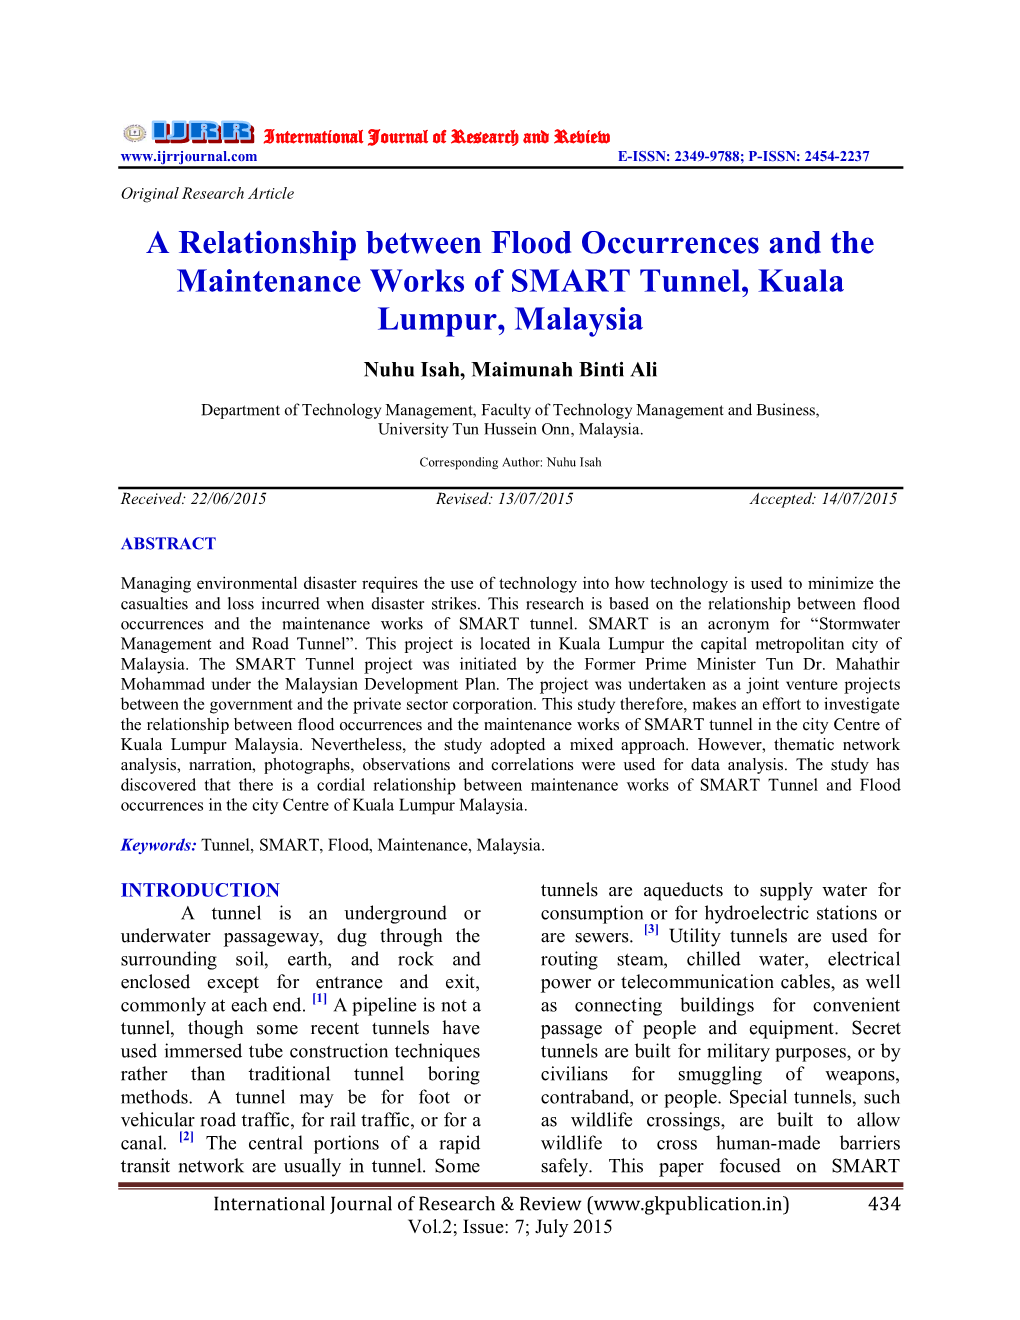 A Relationship Between Flood Occurrences and the Maintenance Works of SMART Tunnel, Kuala Lumpur, Malaysia